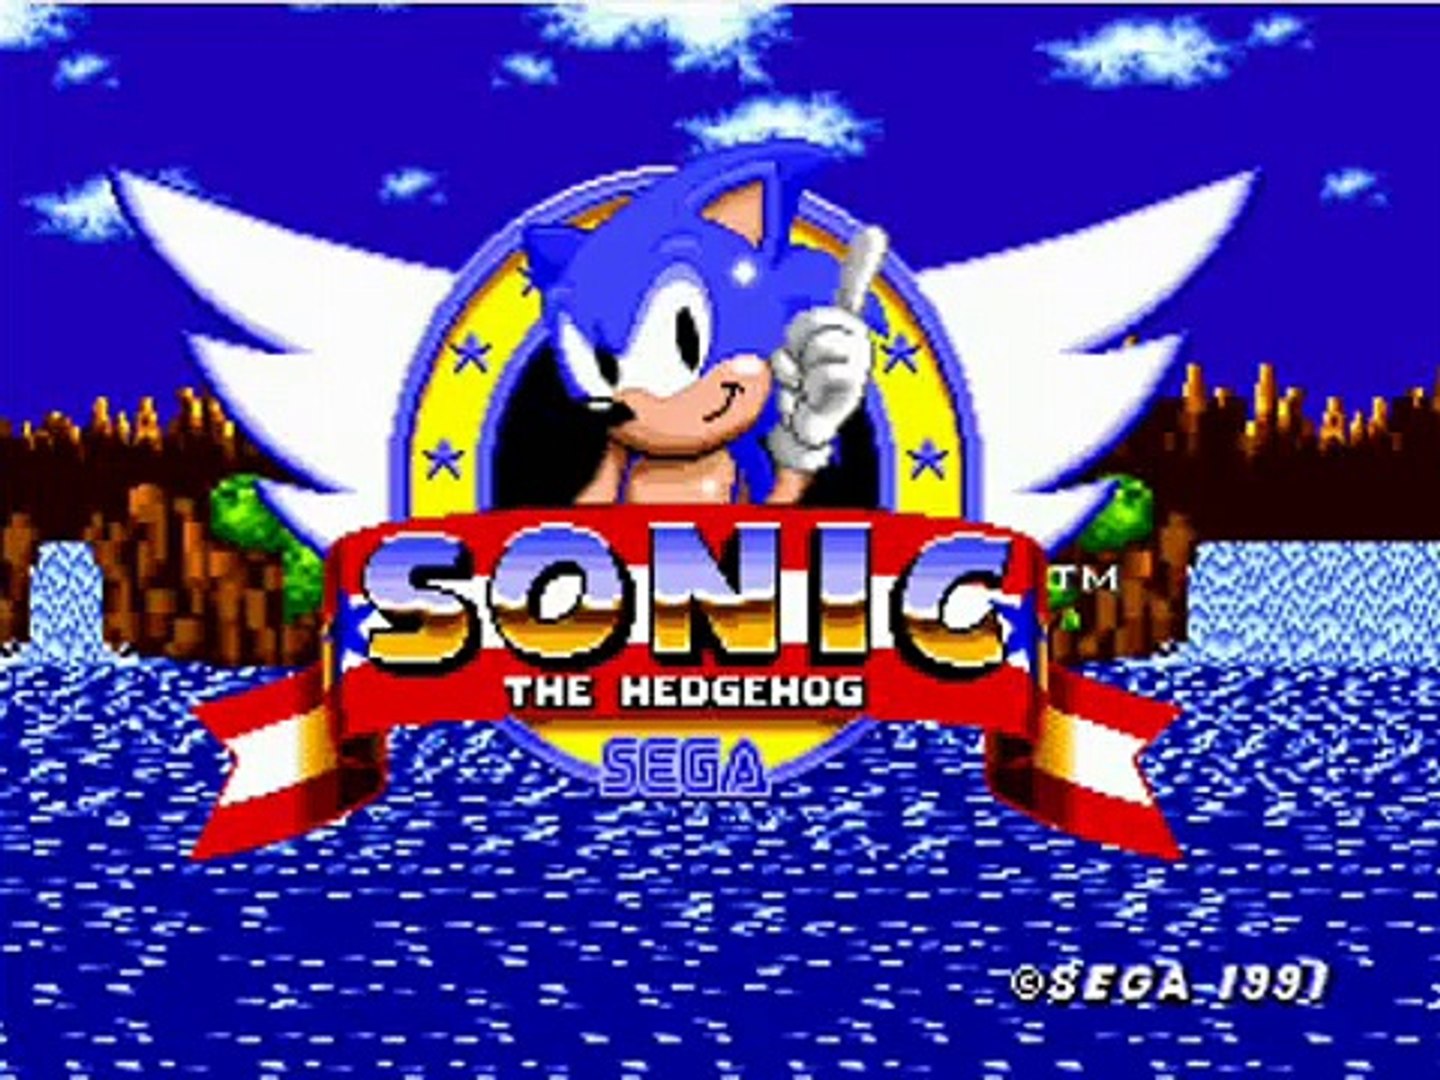 Sonic 1 Music: Green Hill Zone [extended] - video Dailymotion